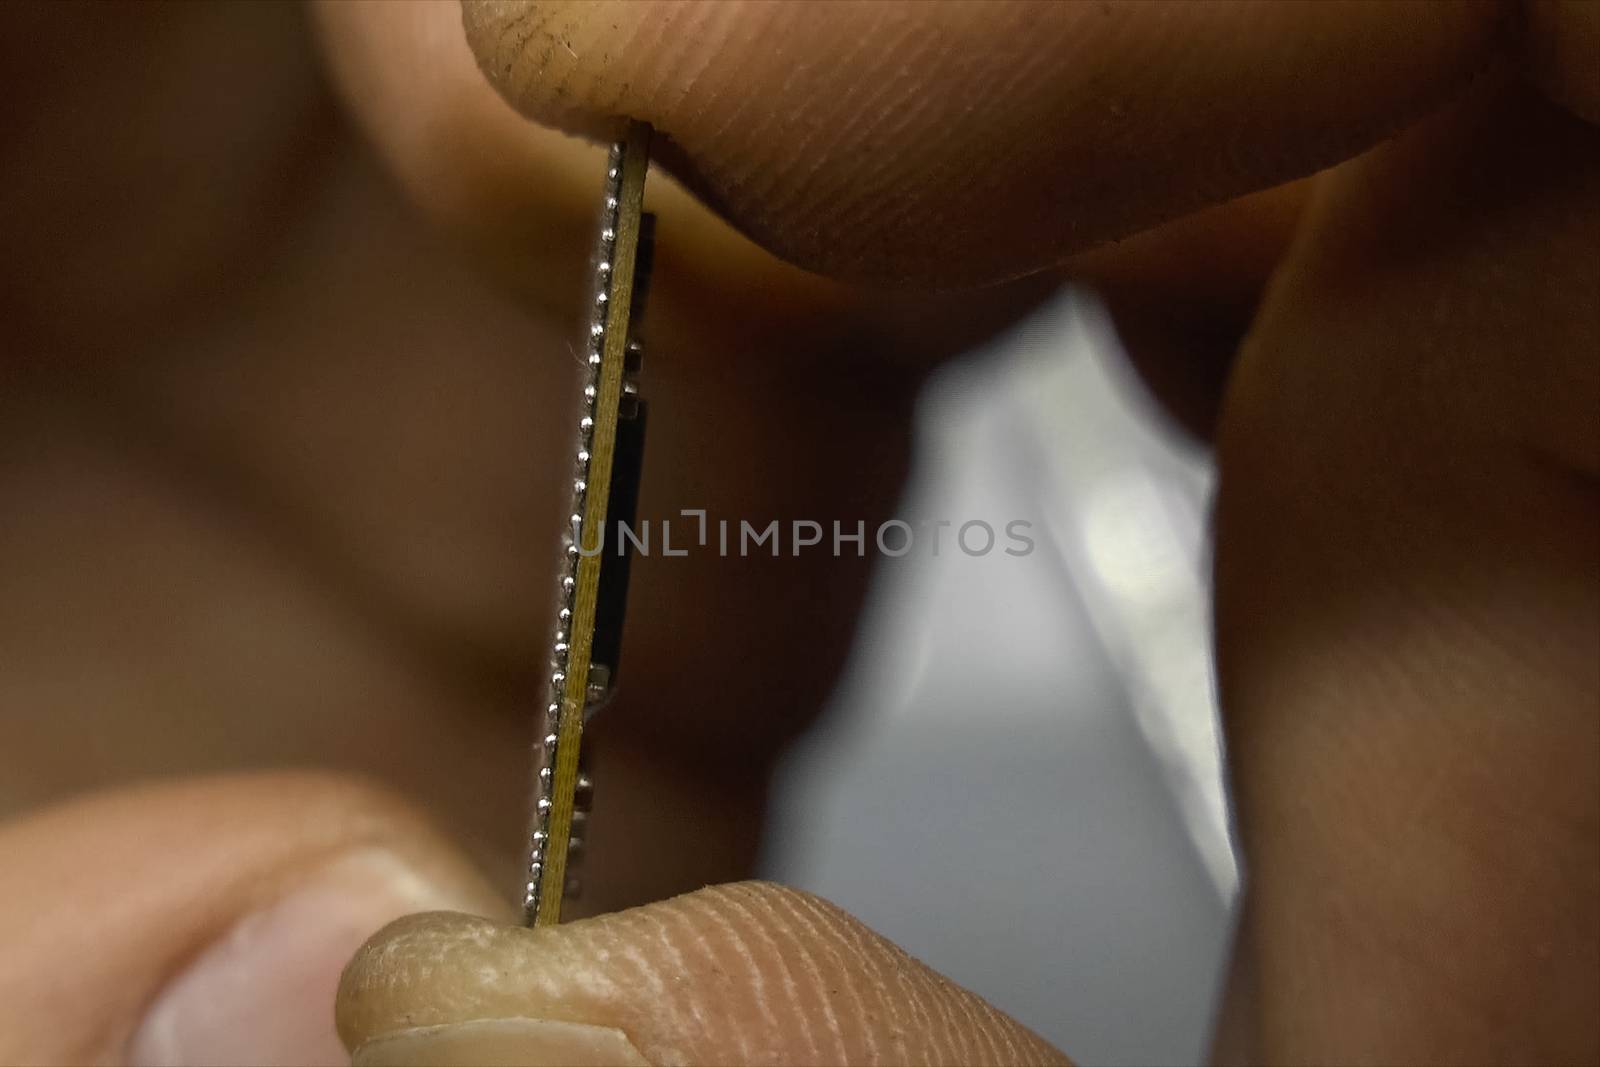 recovered computer microprocessor chip is in the hands of a man. by DePo